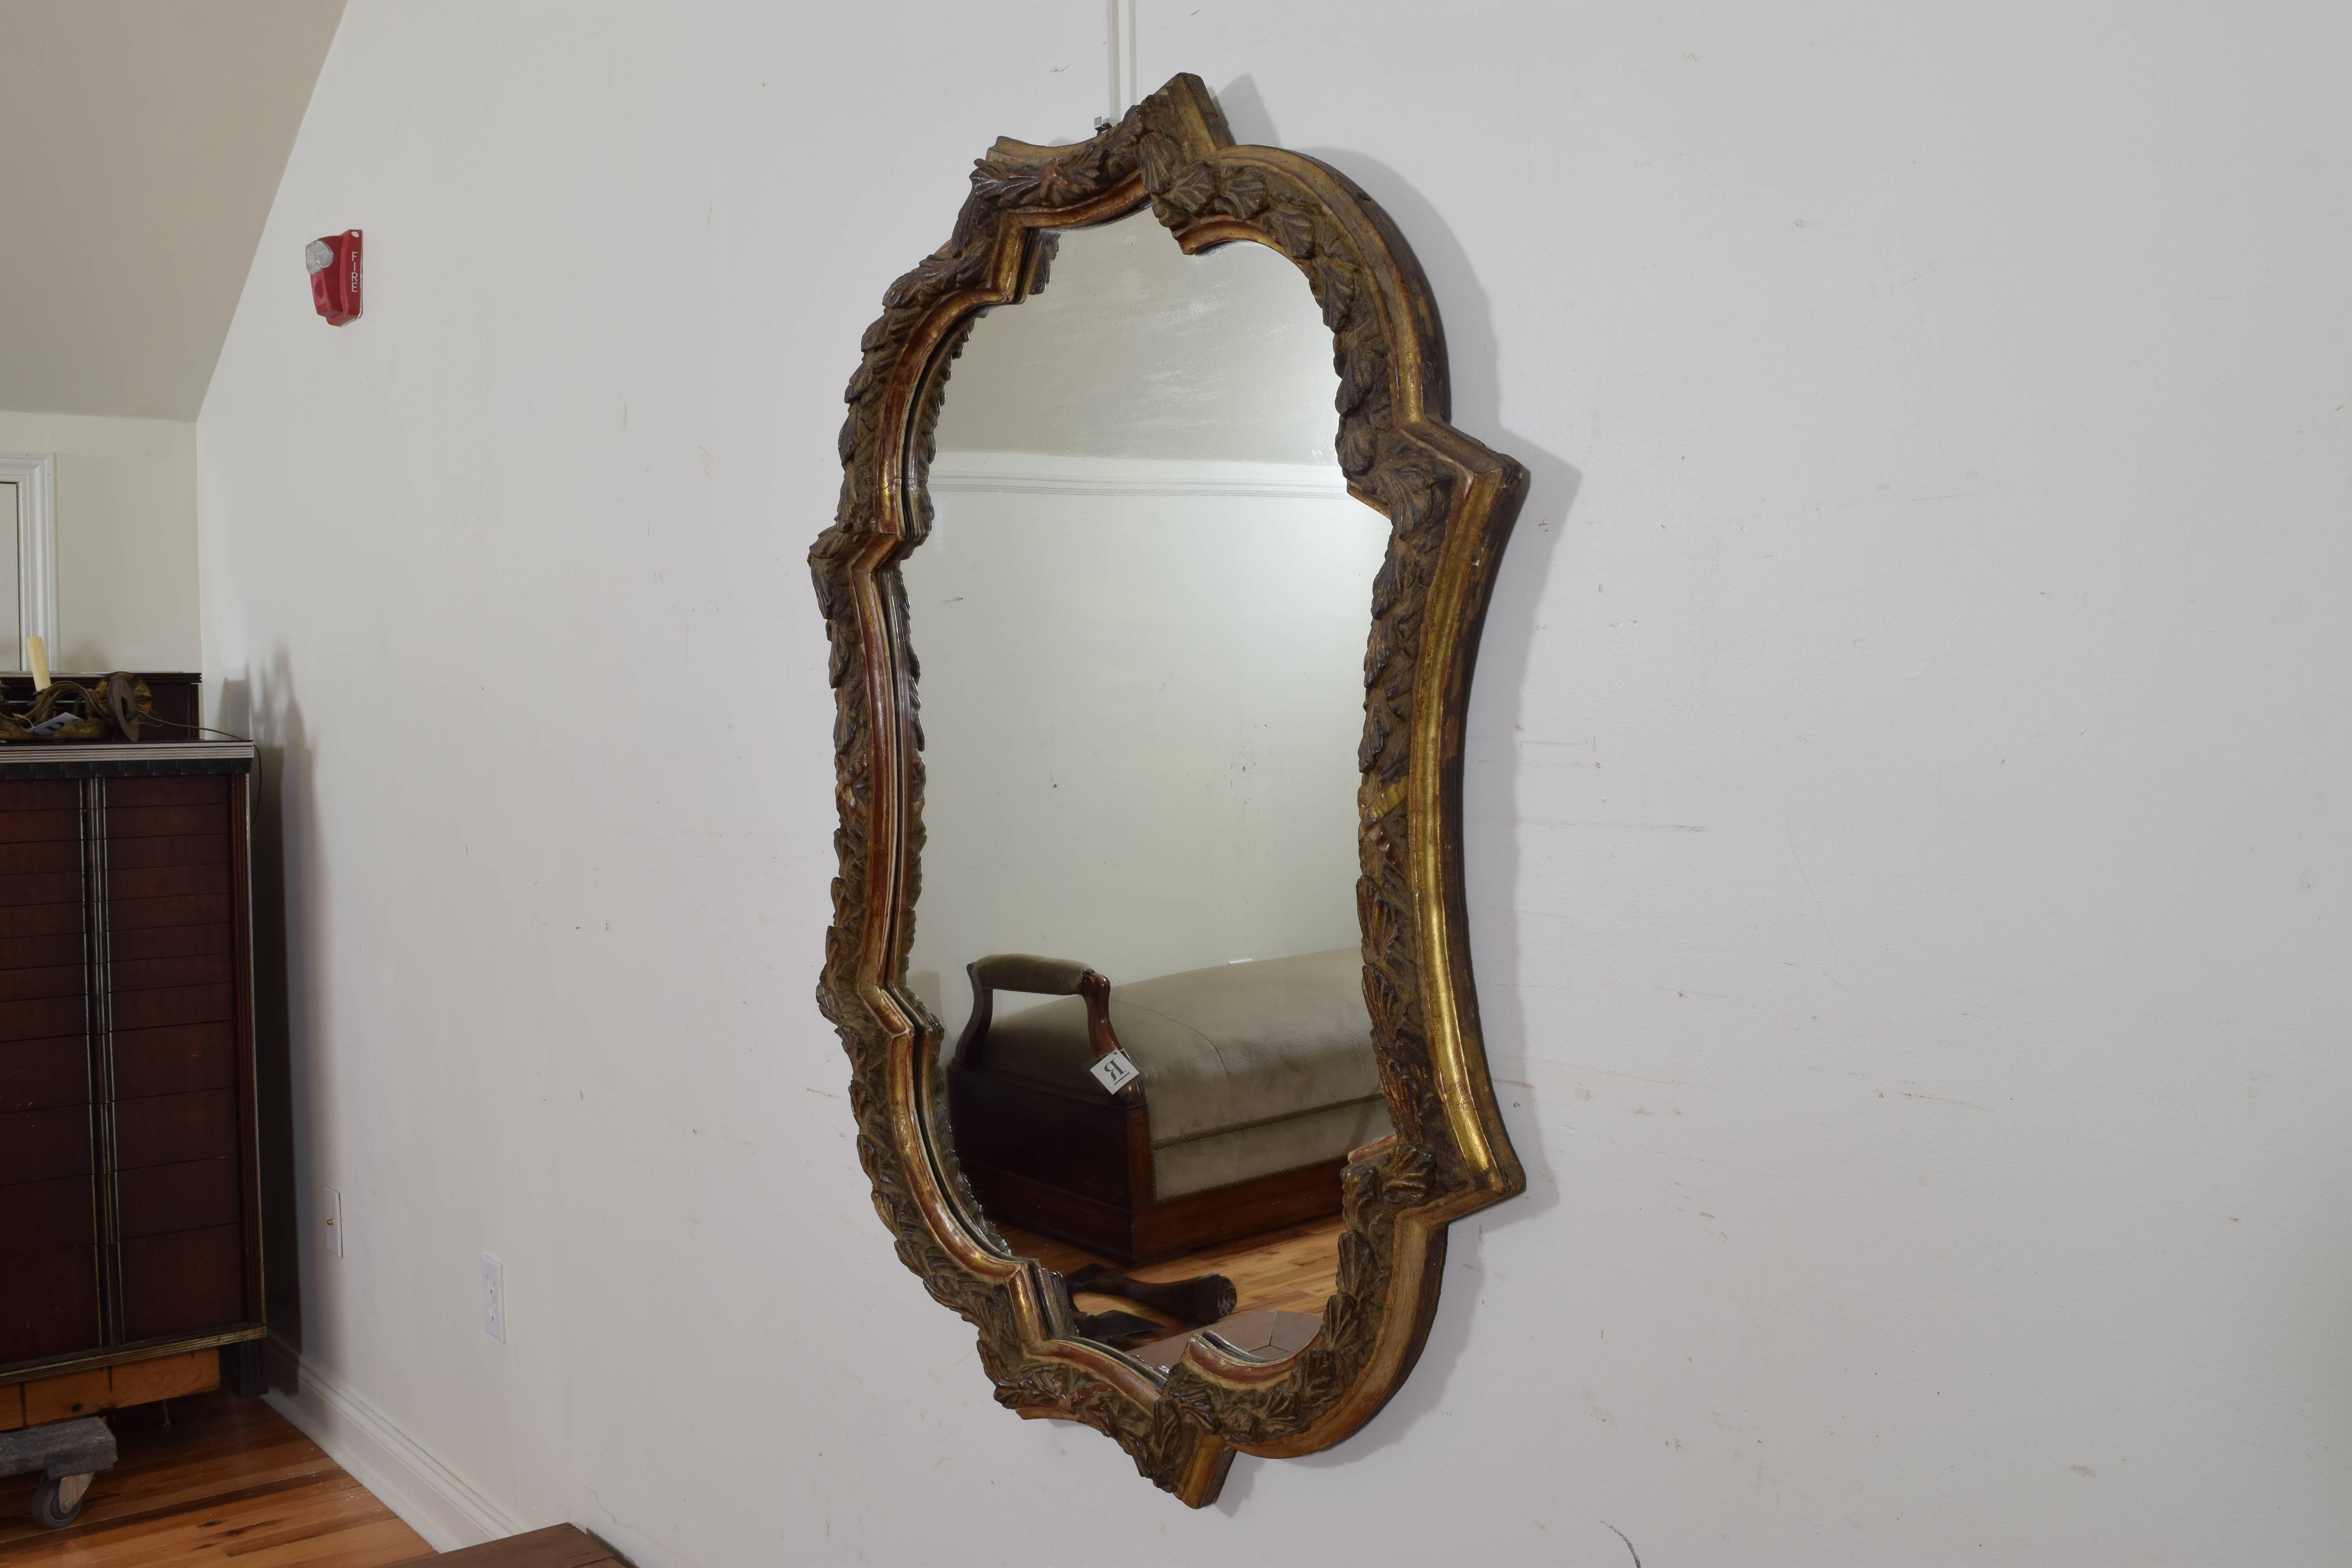 The shaped frame constructed of carved and gilded wood, with a lower molded edge.